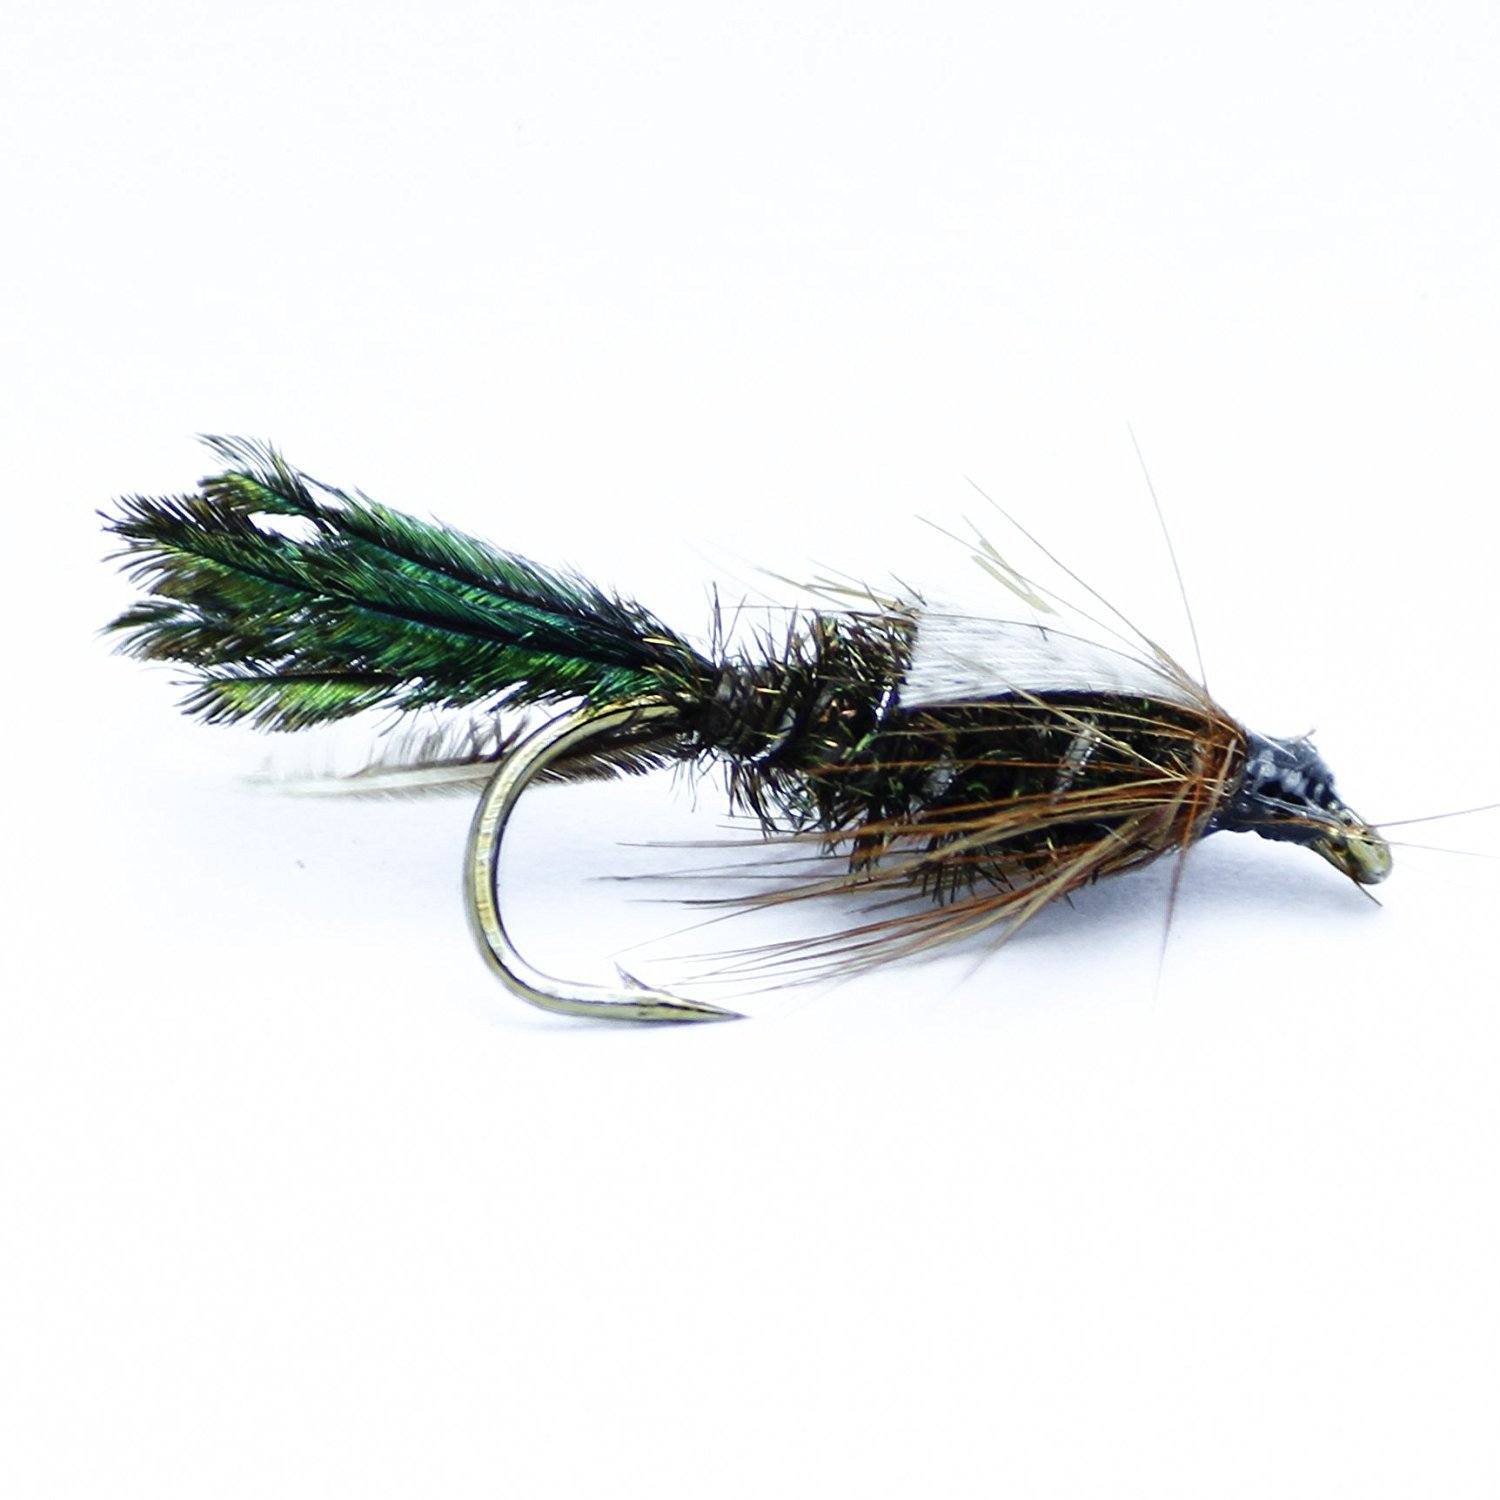 Alwonder 10PCS Trout Flies Stonefly Nymphs for Fly Fishing, Wet Nymph Flies  Fly Fishing Lures Assortment with Storage Box, Size 12 Copper Bead Head  Stoneflies Nymphs for Bass, Salmon, Panfish, Wet Flies 